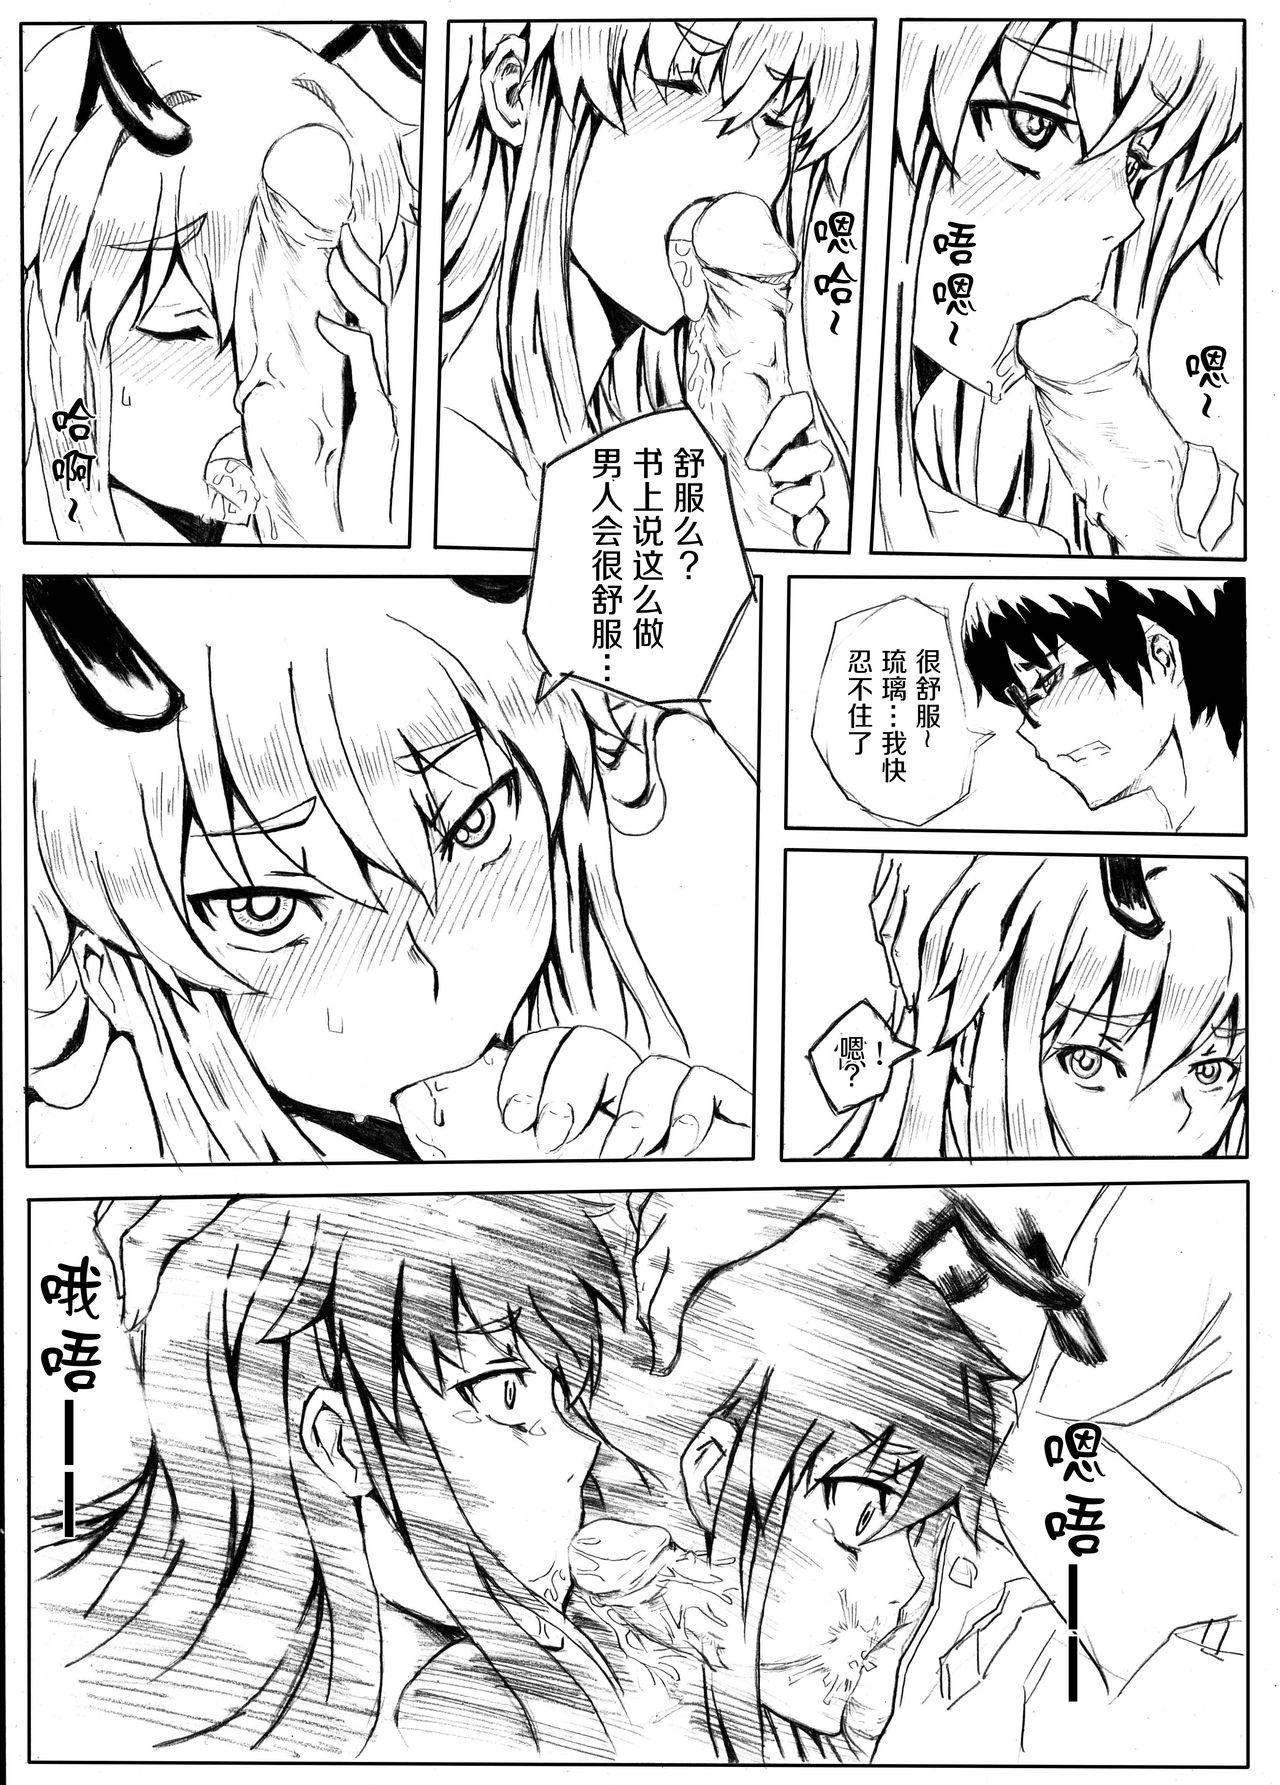 Black [Shuseikan(Chinese Animation-School Shock)] Don`t Leave Me Alone 201108 [Chinese]（不想记名汉化） - School shock Tgirl - Page 10